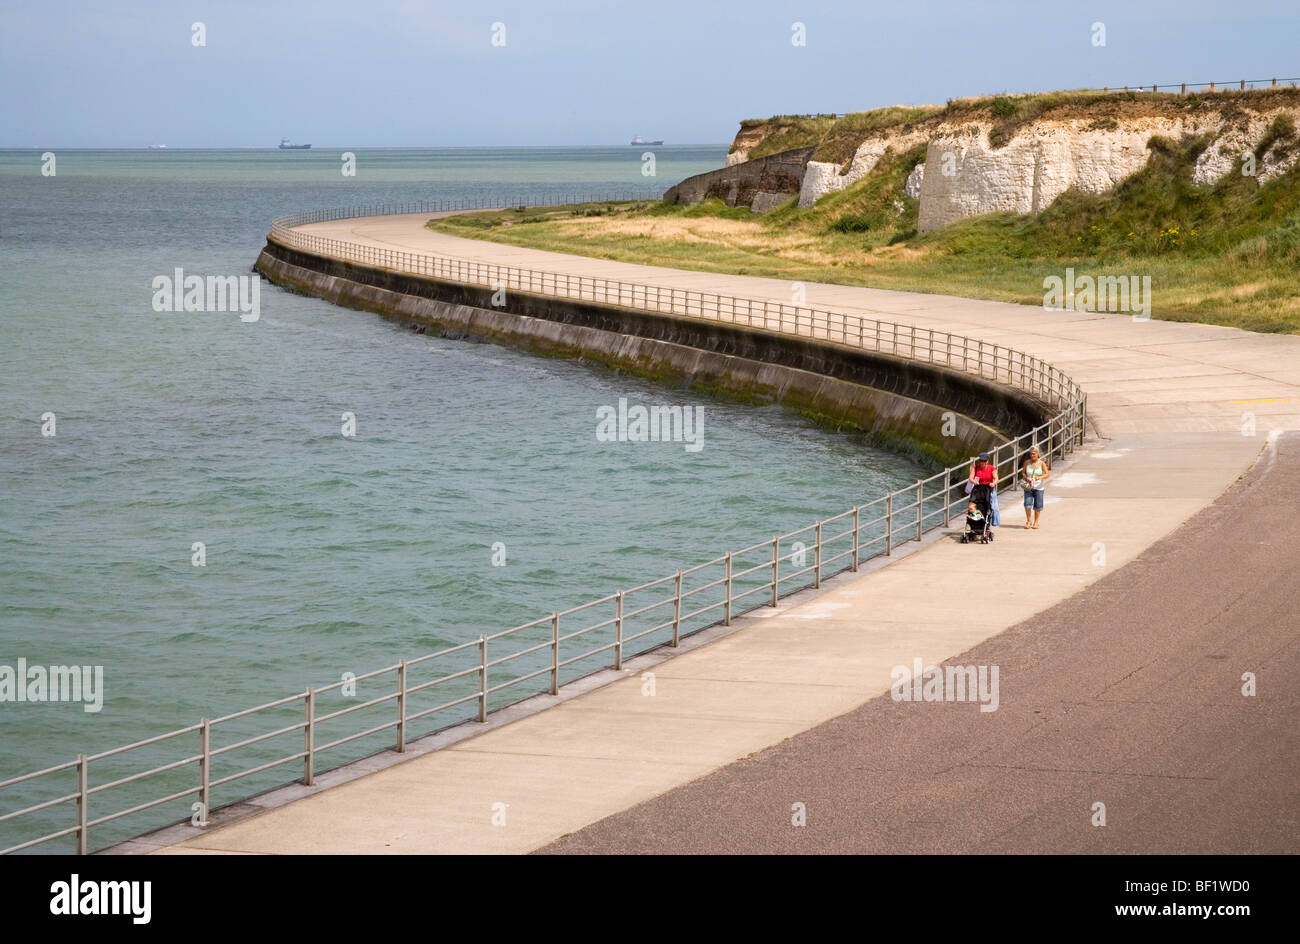 the prom at westgate bay Margate Kent Stock Photo